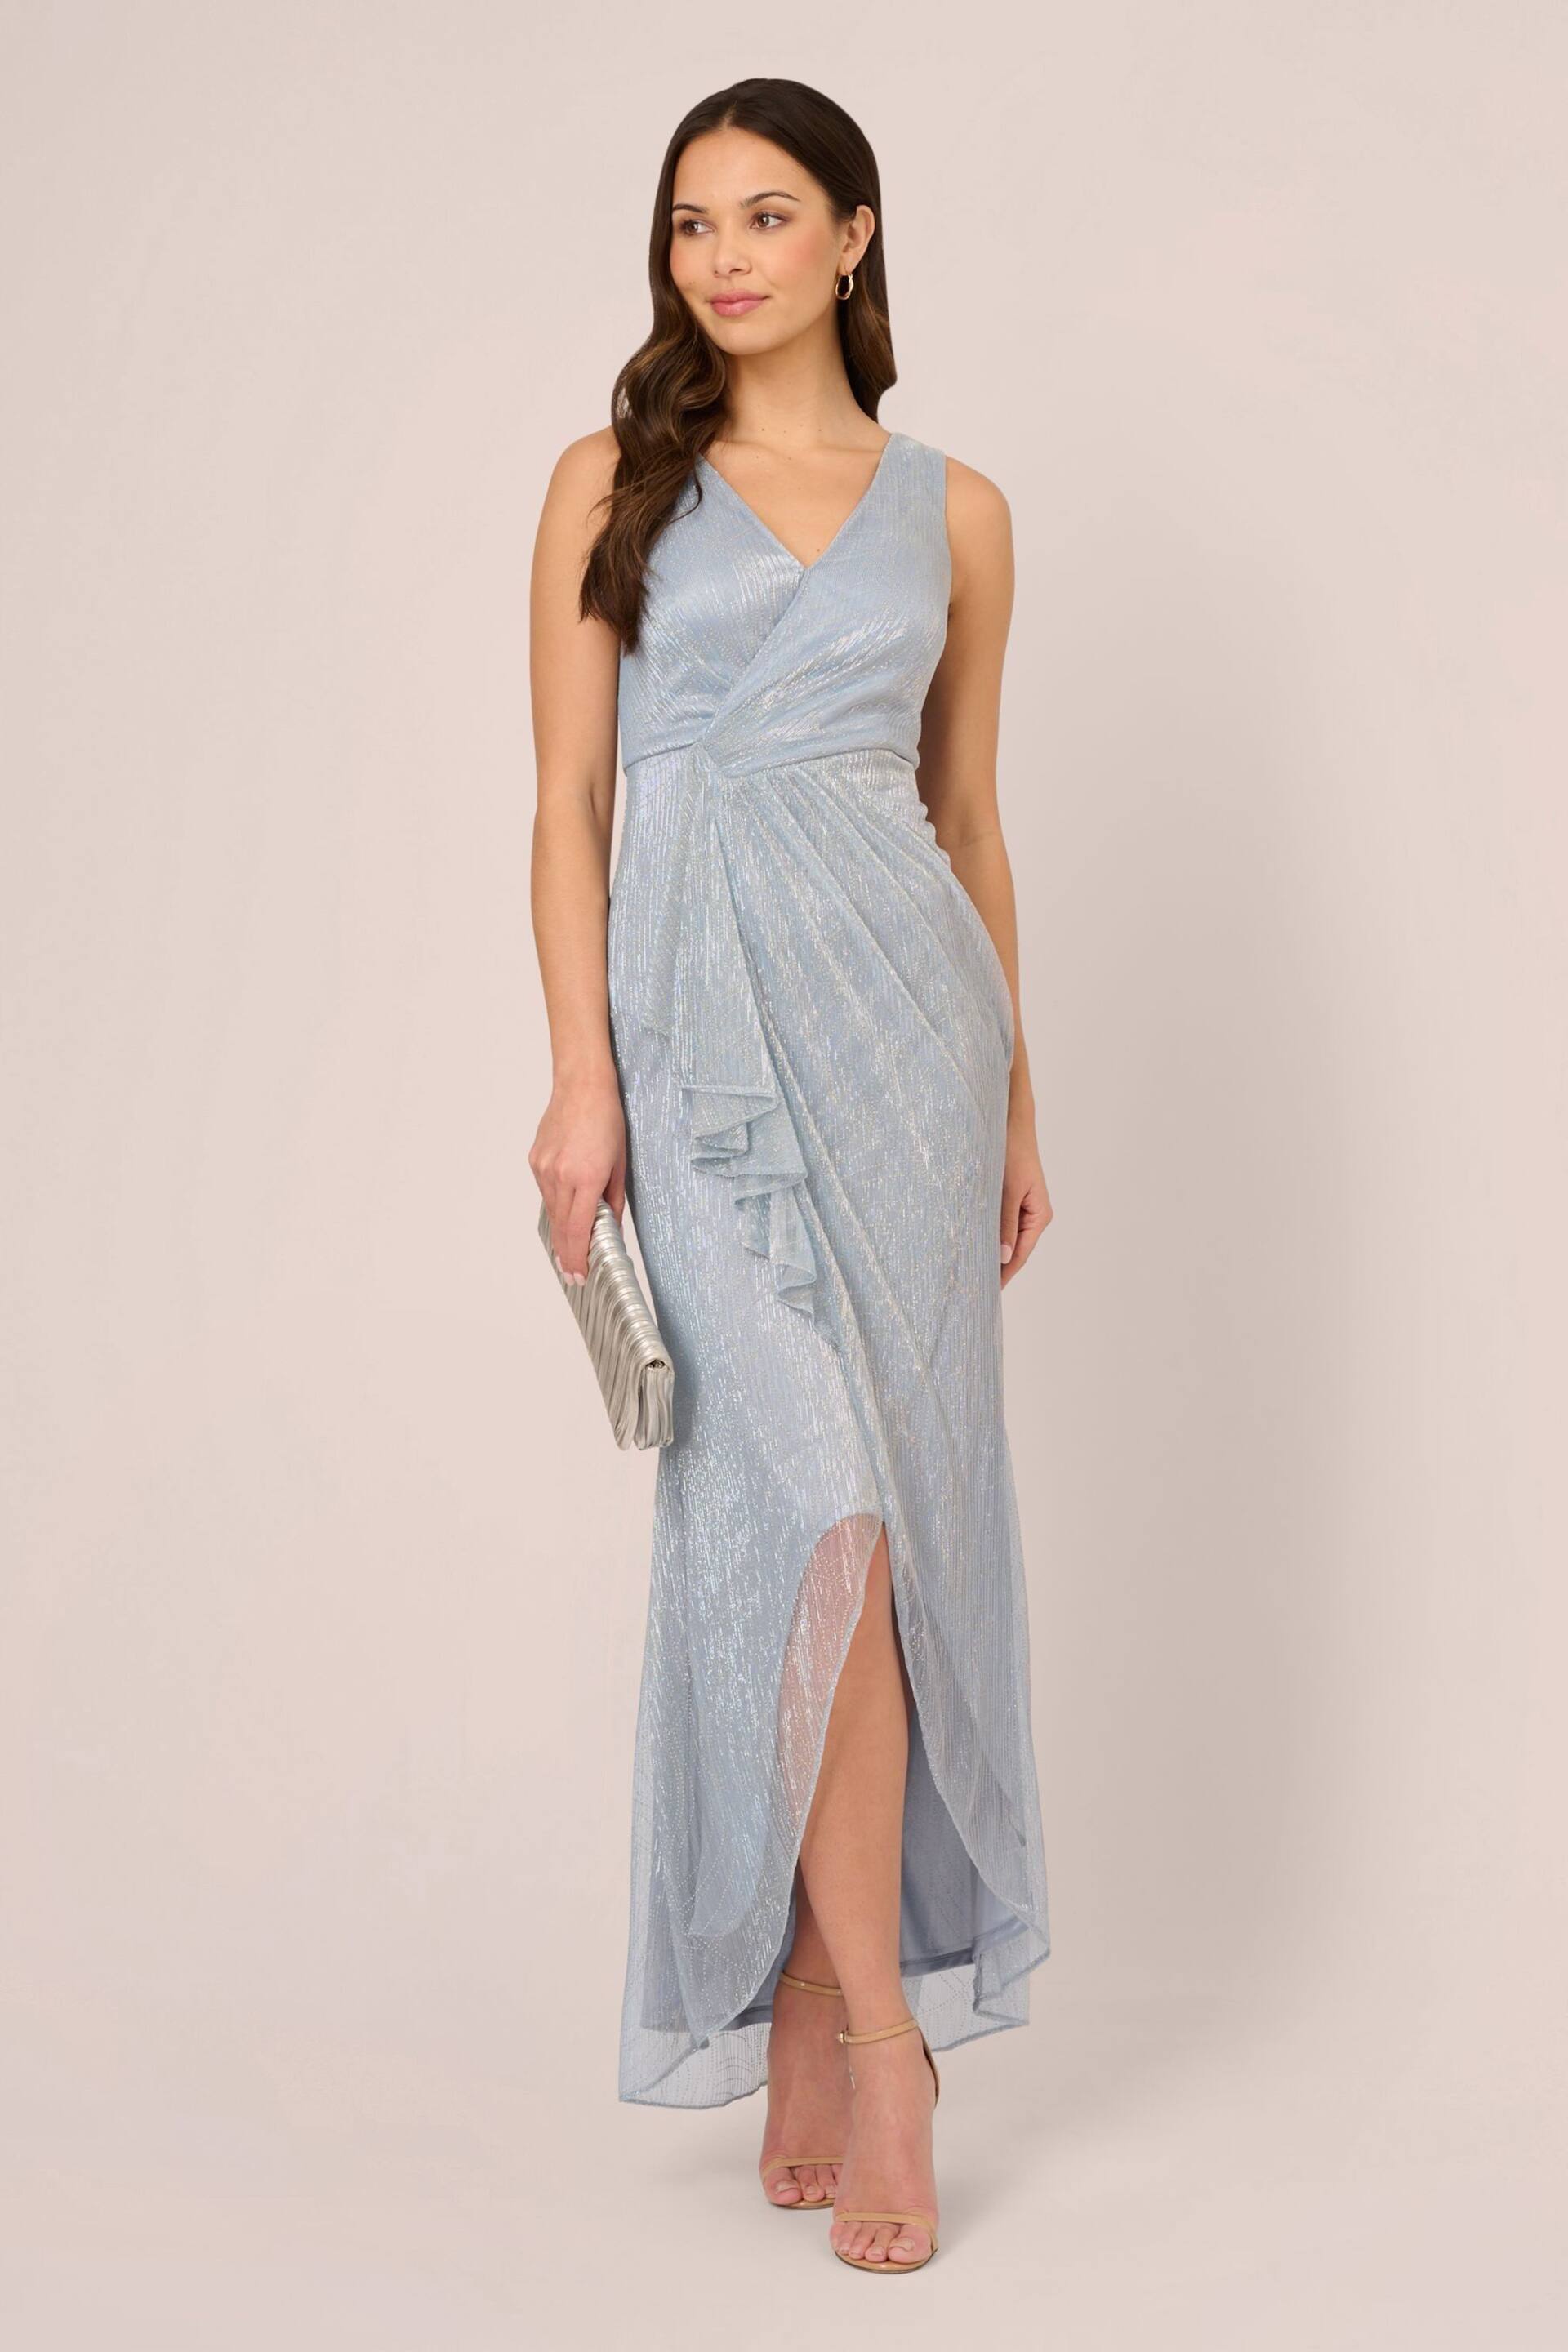 Adrianna Papell Blue Metallic Mesh Cascade Gown - Image 3 of 7